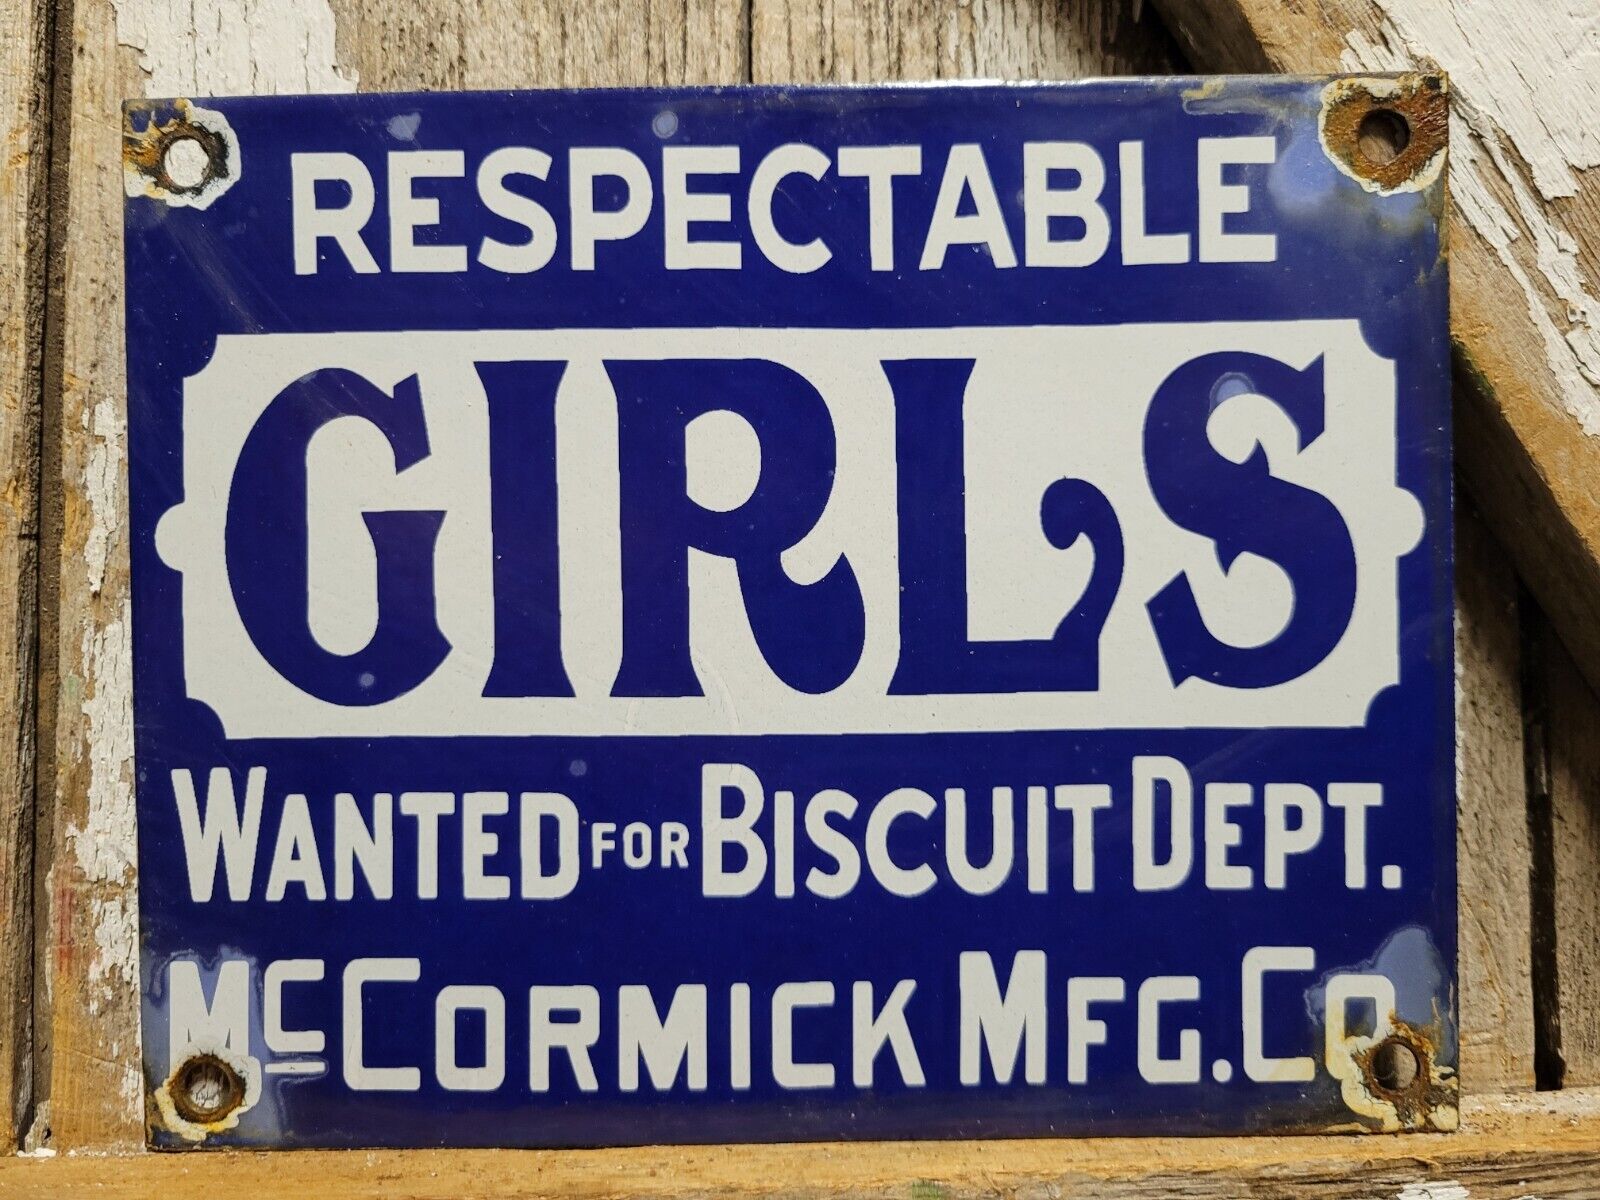 VINTAGE RESPECTABLE GIRLS WANTED PORCELAIN SIGN OLD MCCORMICK BISCUITS FACTORY